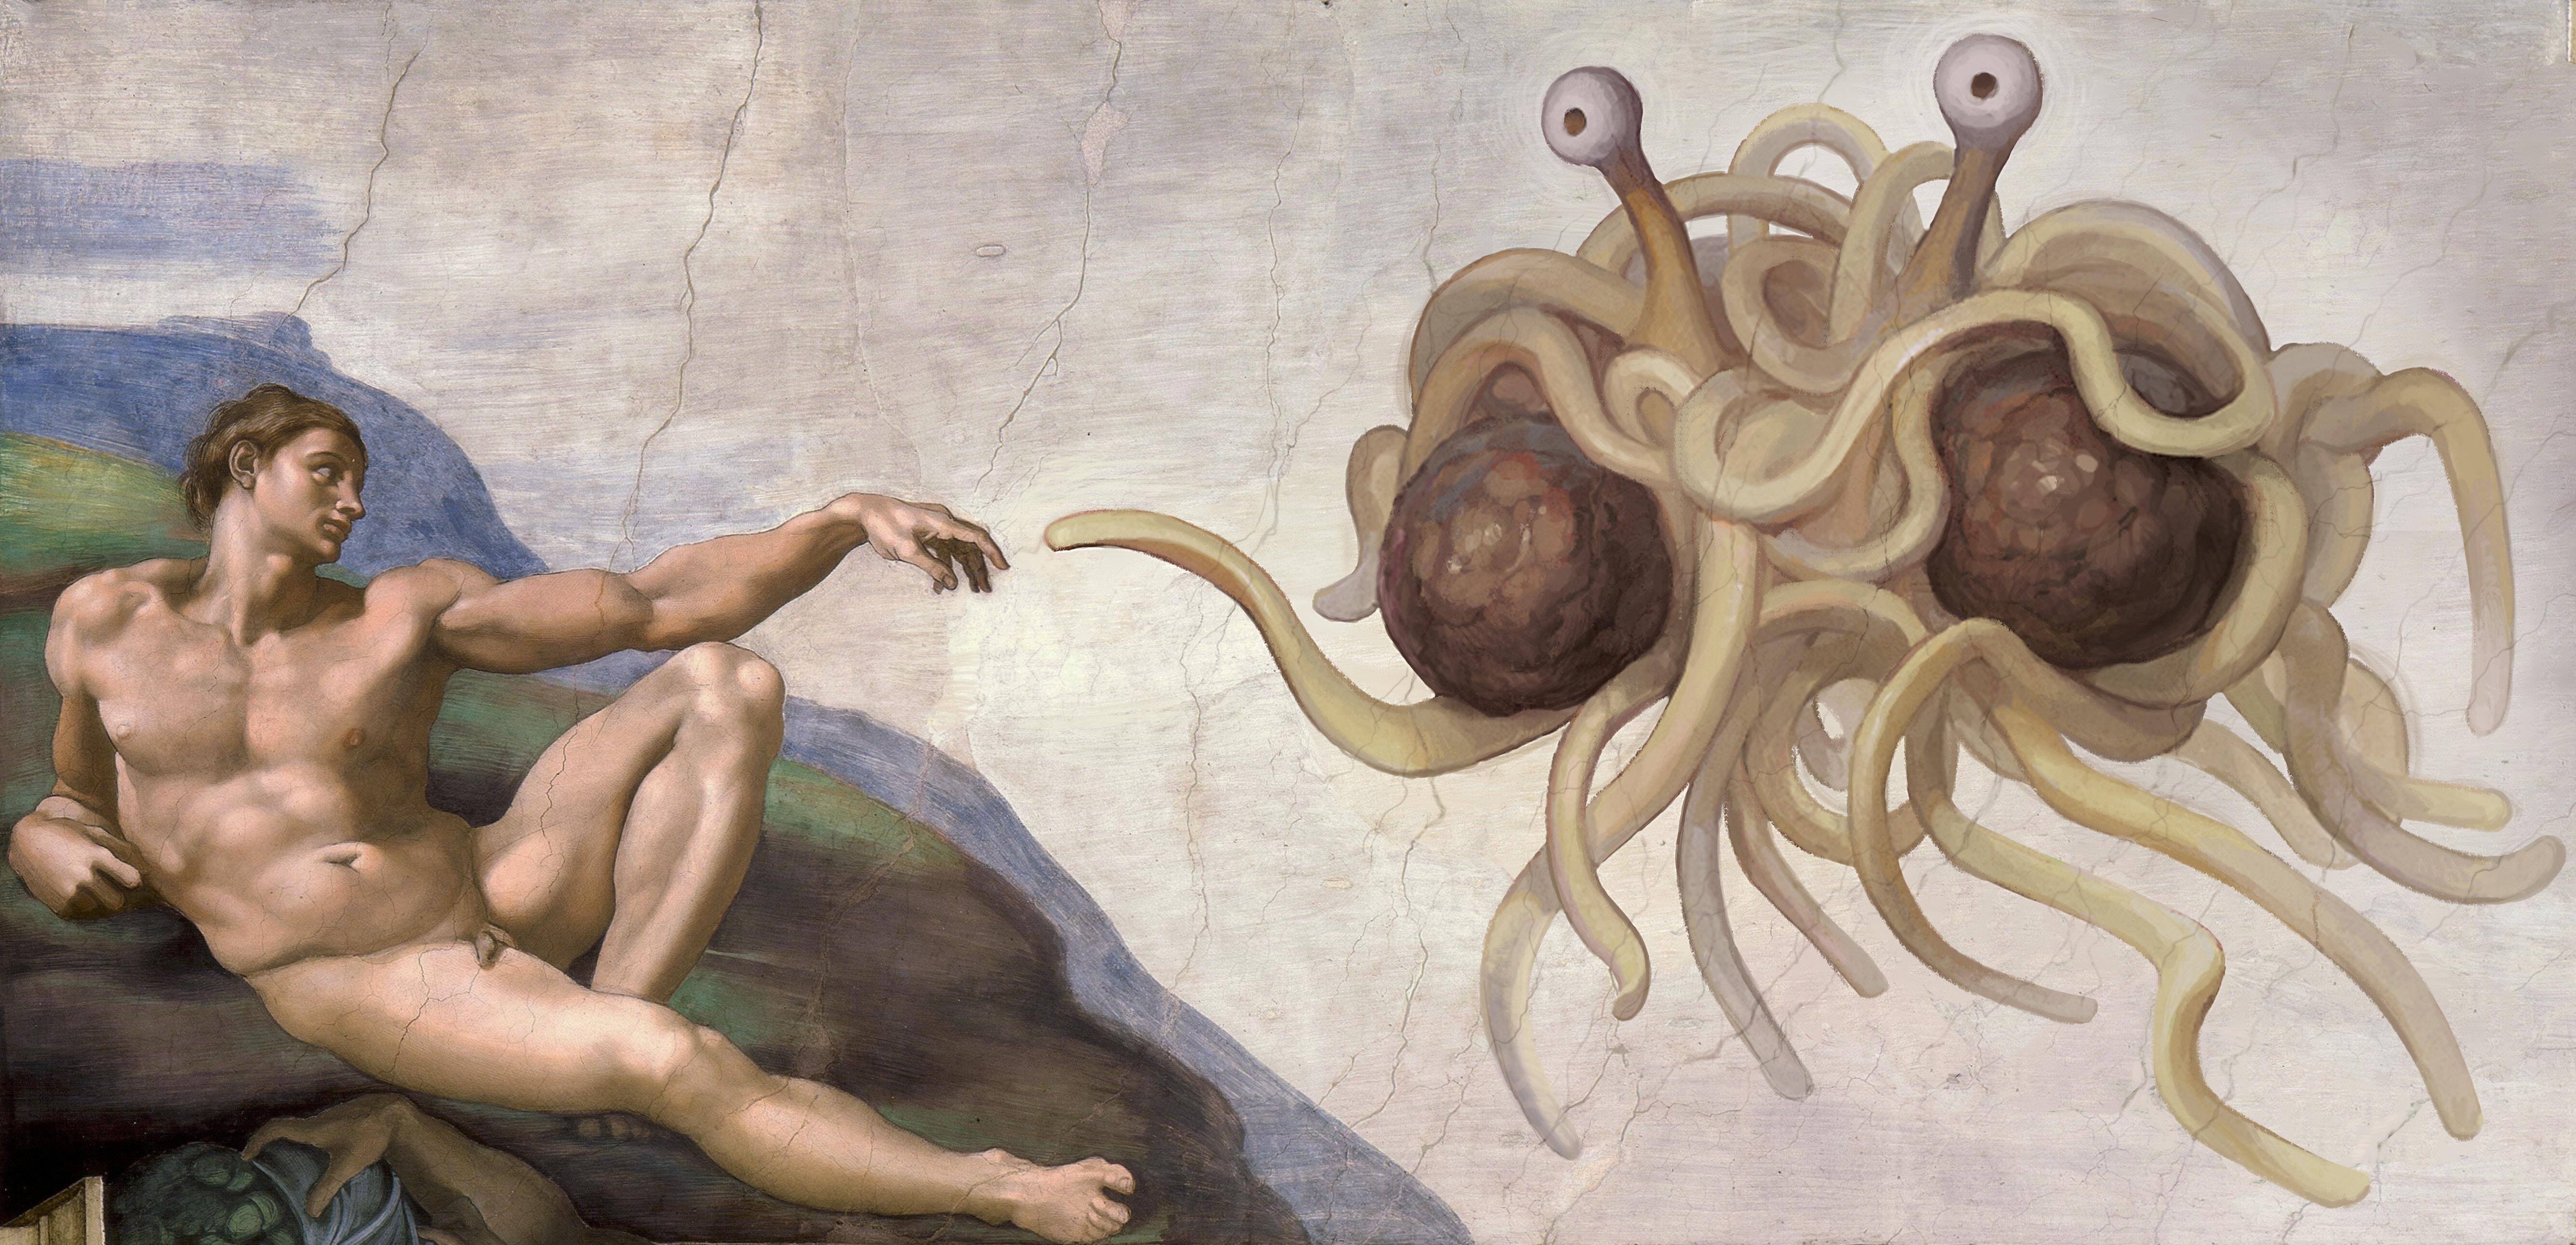 Touched_by_His_Noodly_Appendage_HD 2 (wecompress.com).jpg